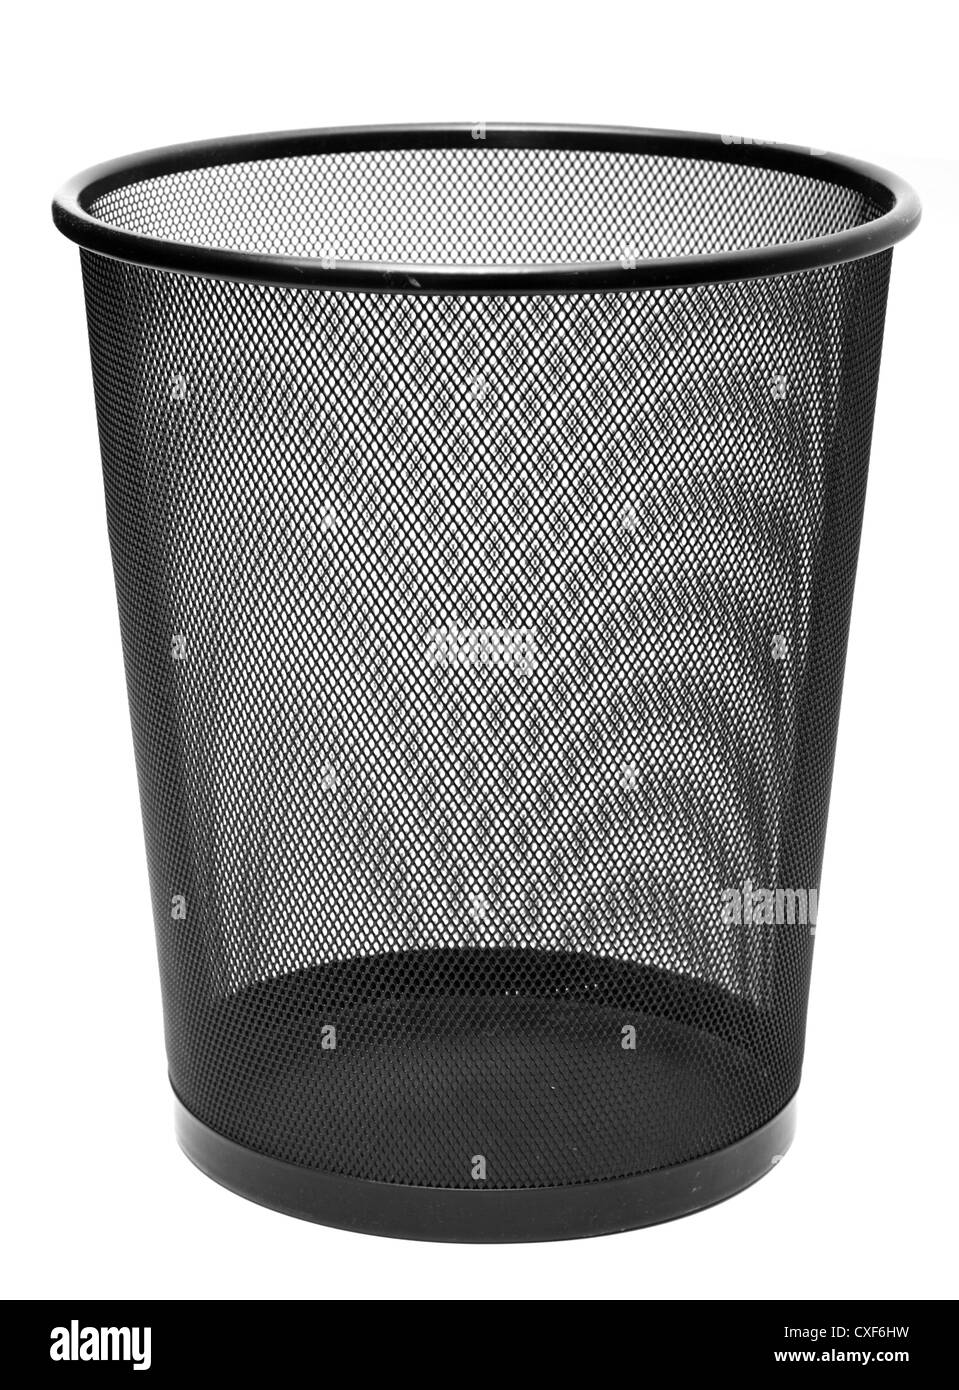 Trash can isolated on white background Stock Photo